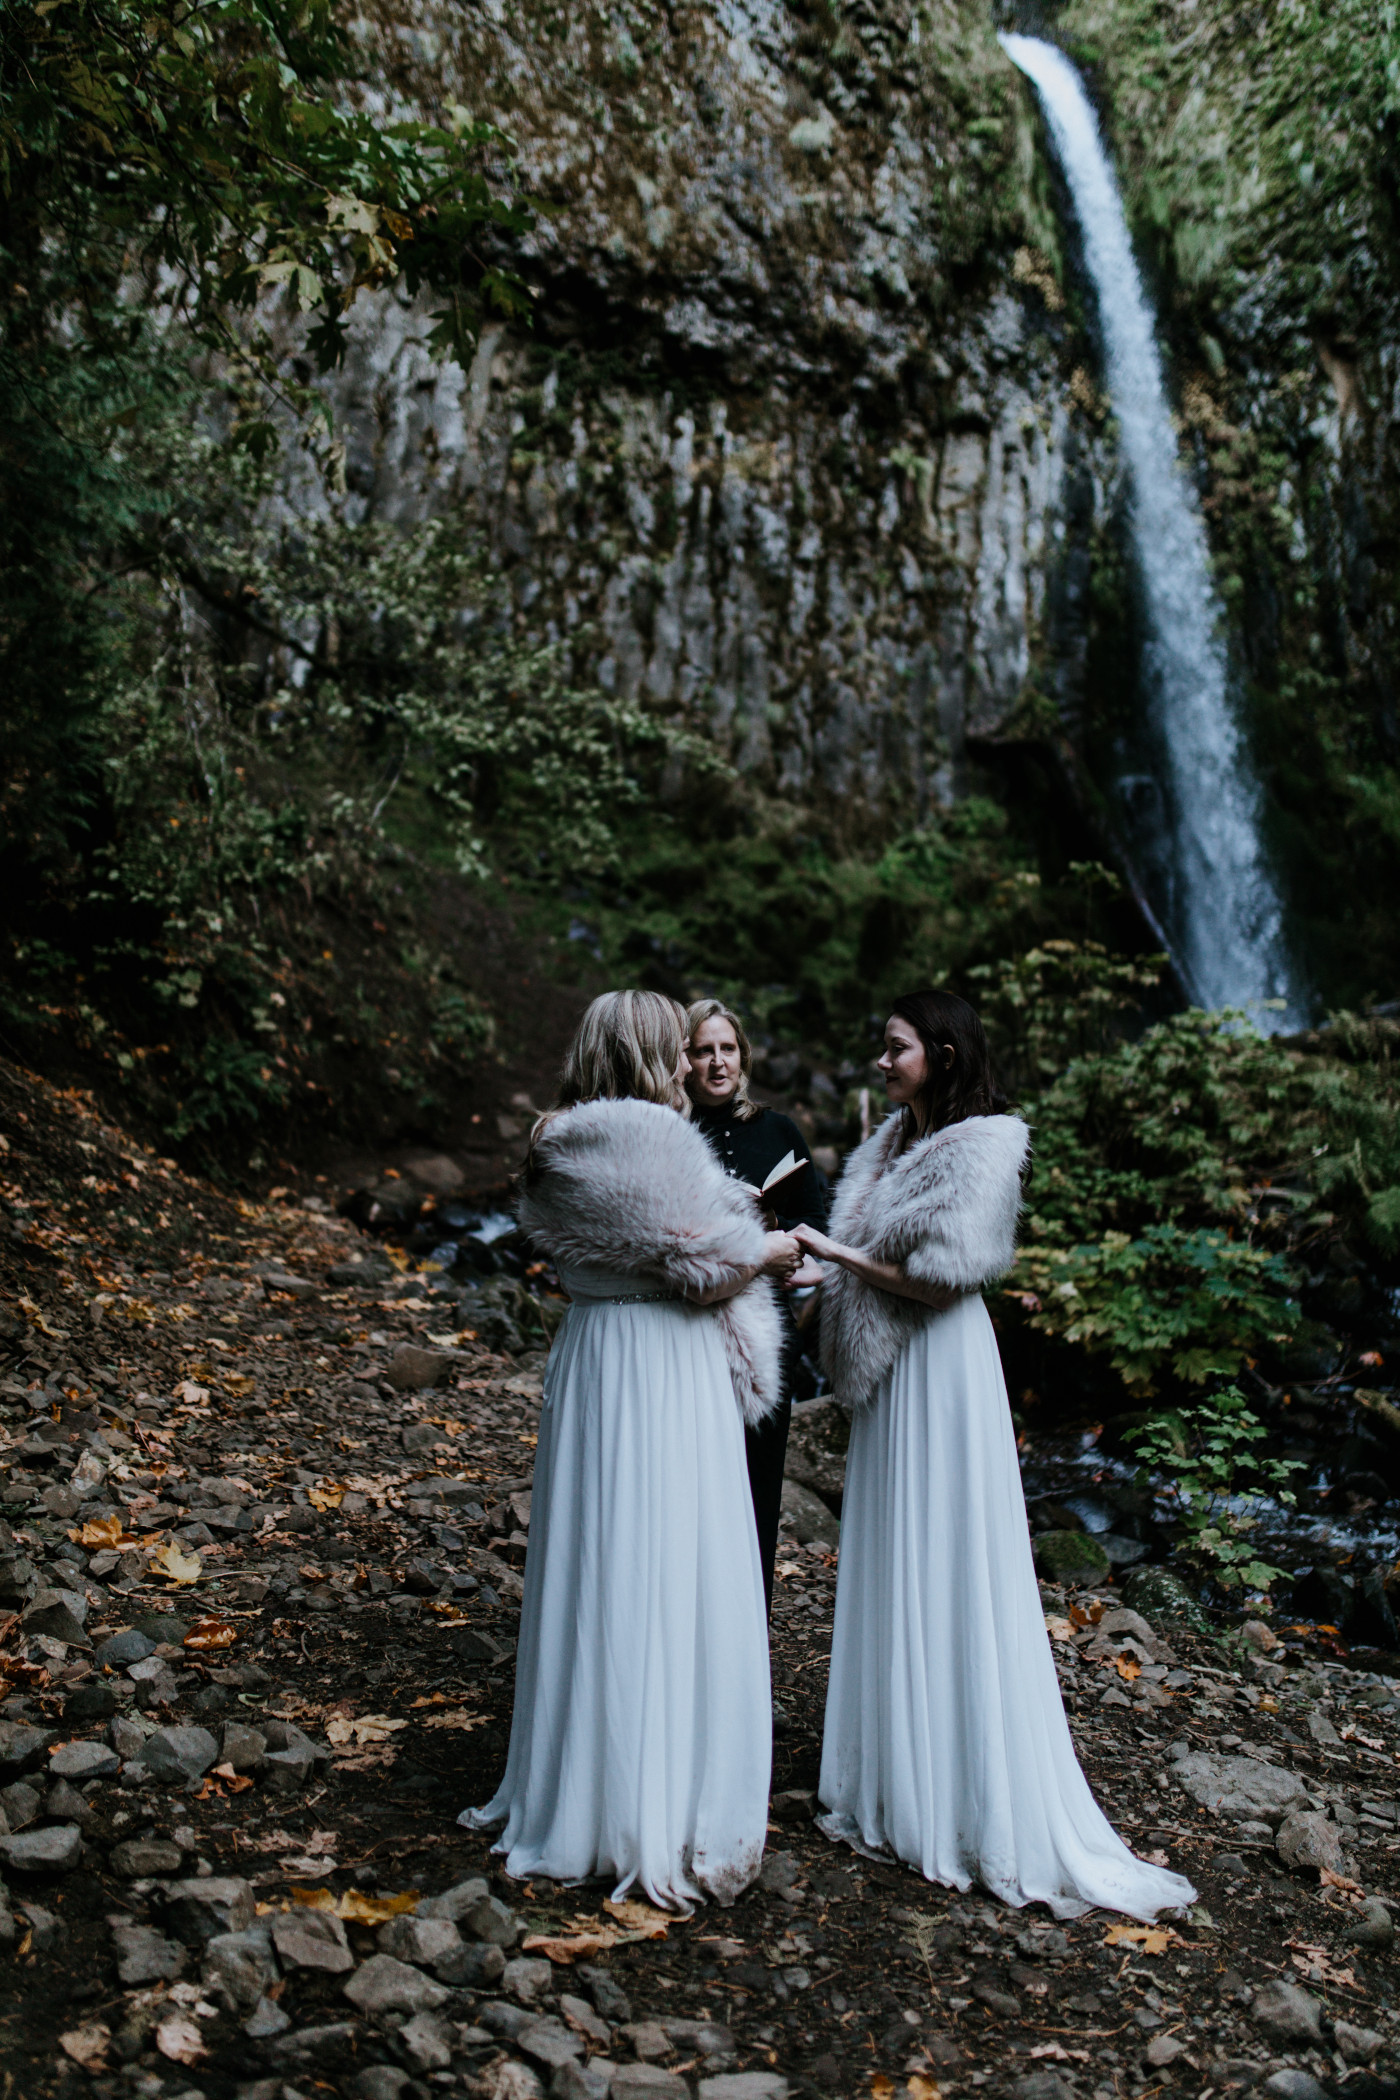 Hayley and Tiffany during their elopement with a view of the waterfall in the background. Elopement photography at the Columbia River Gorge by Sienna Plus Josh.